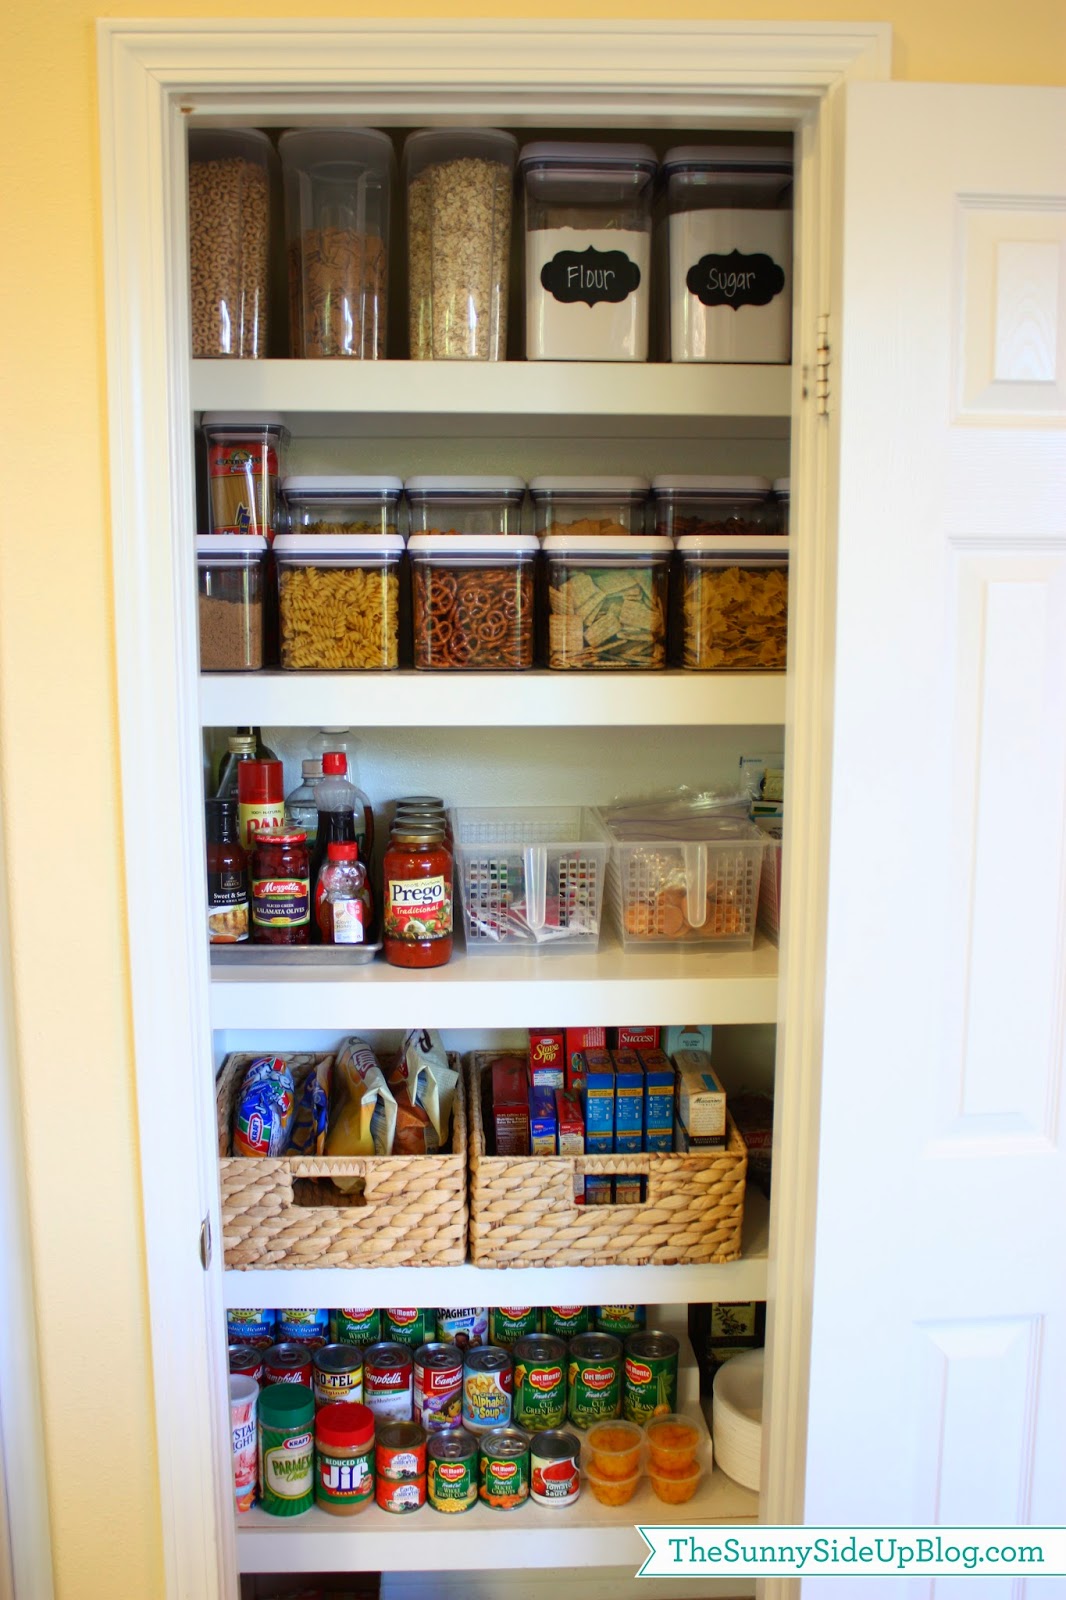 A must have for an organized pantry! These oxo pop container sets